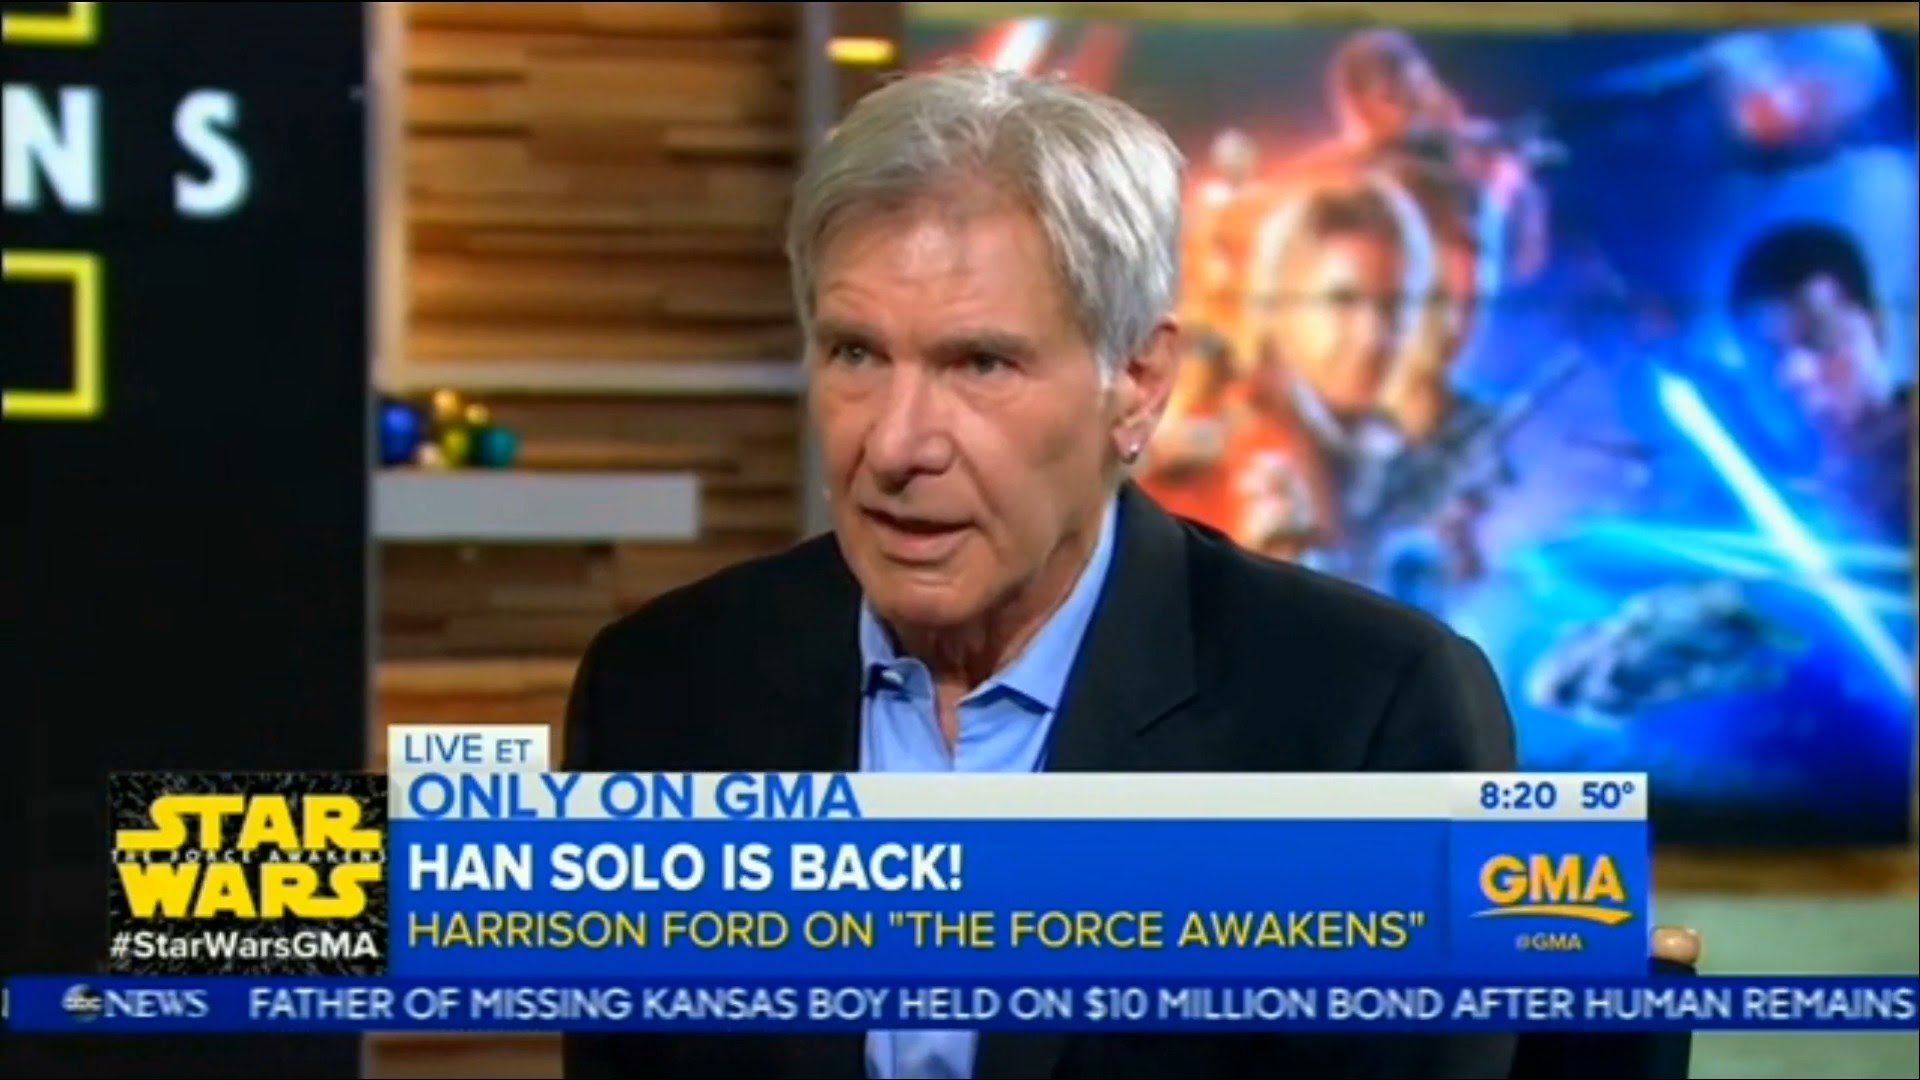 Harrison Ford’s Opinion After Seeing Star Wars: The Force Awakens: “It Was Great!”